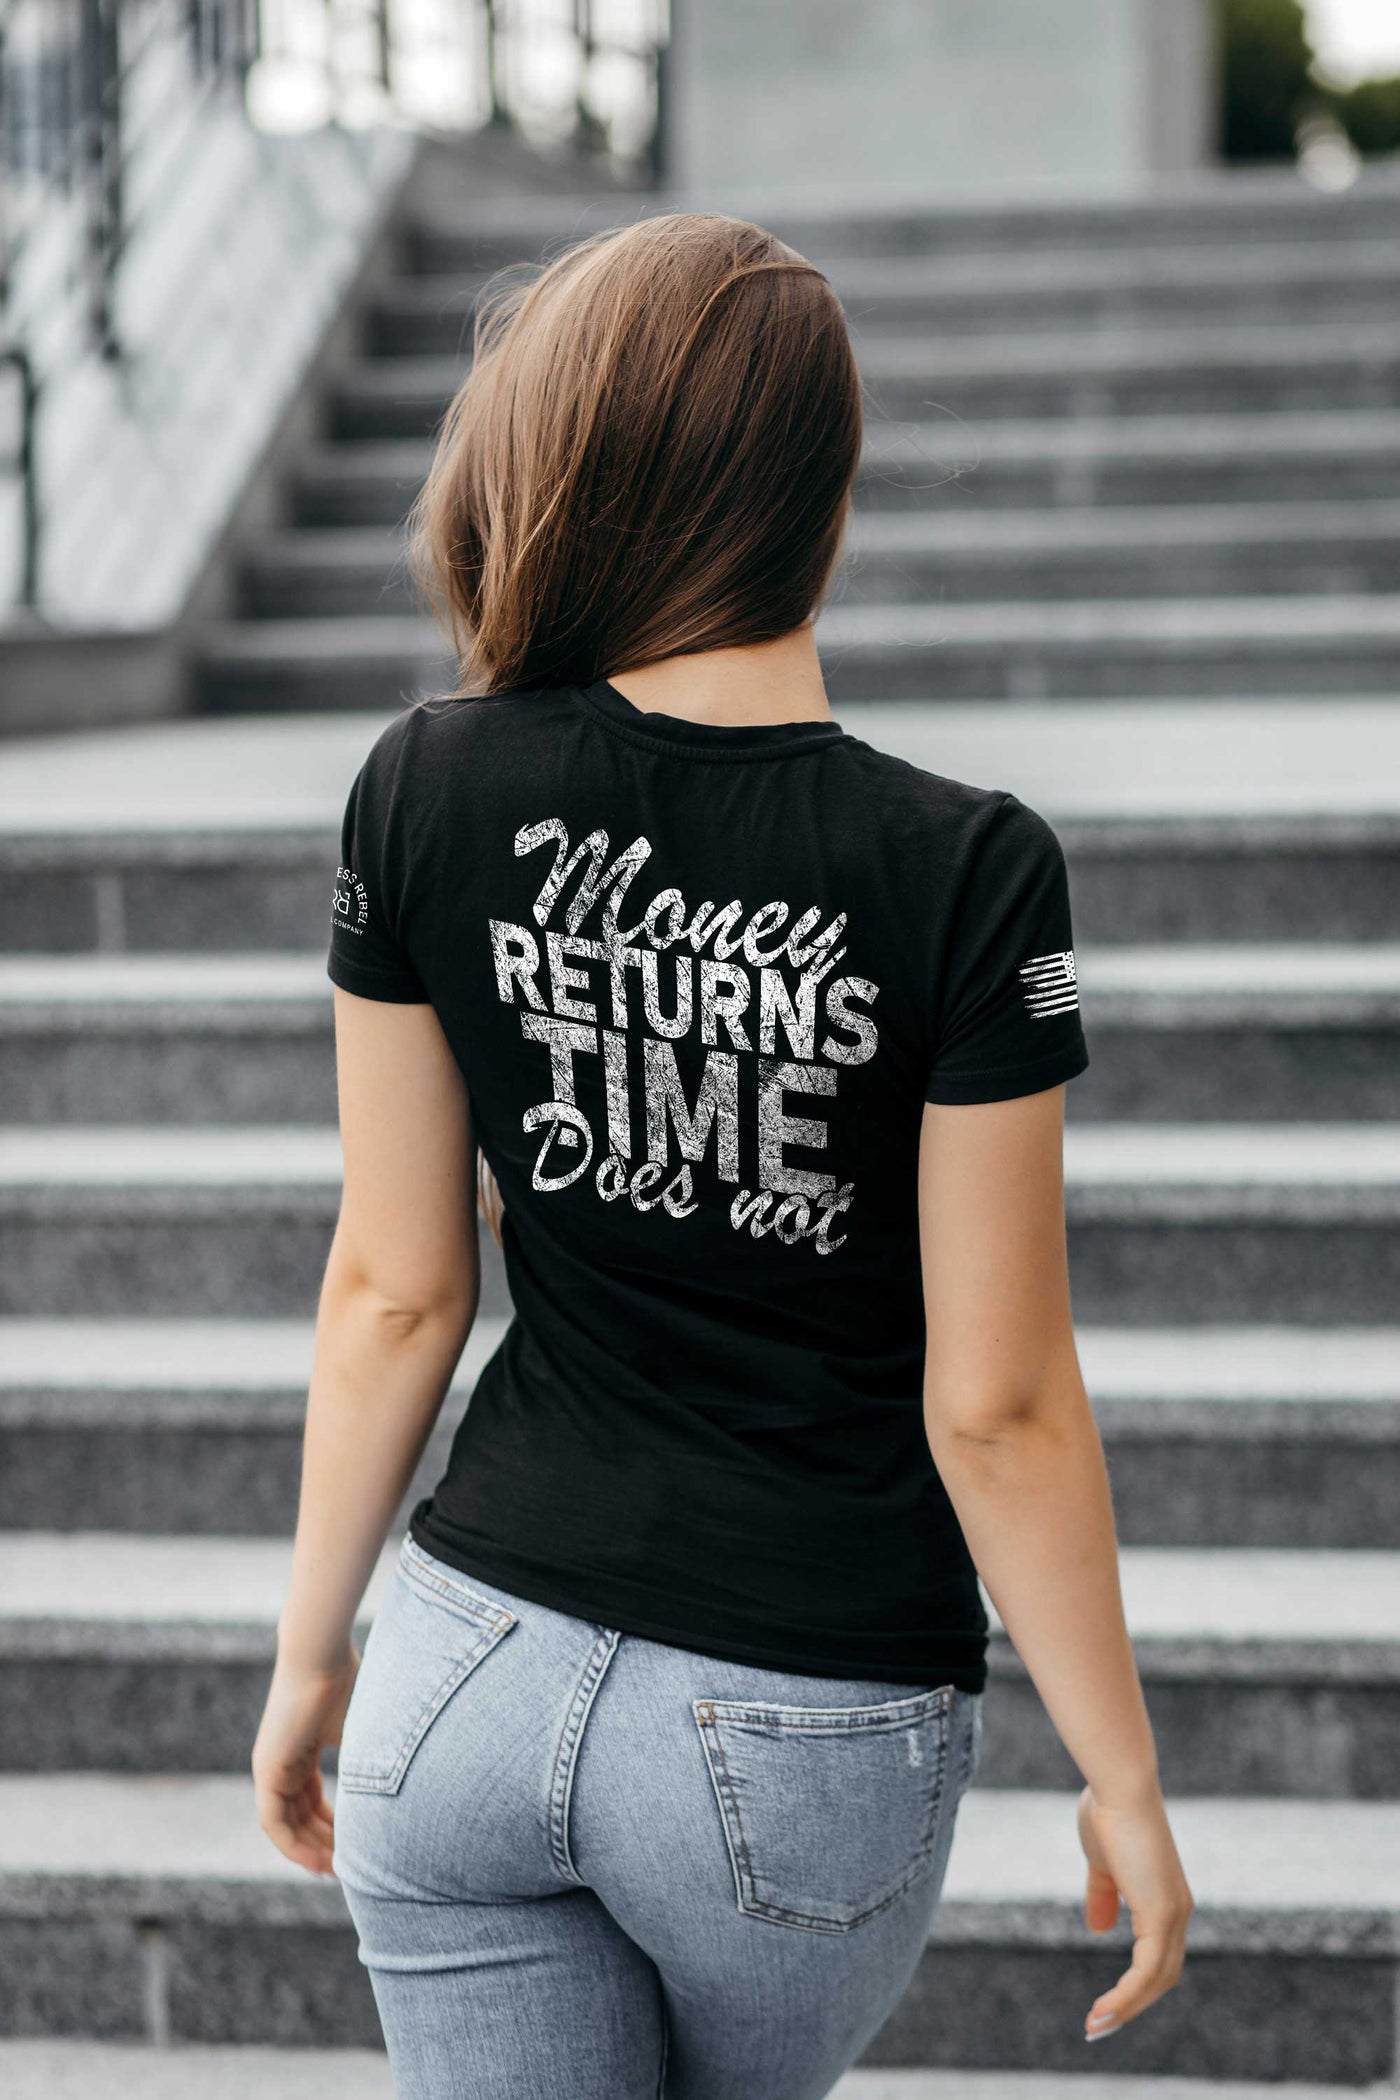 Woman wearing Solid Black Women's Money Returns Time Does Not Back Design Tee